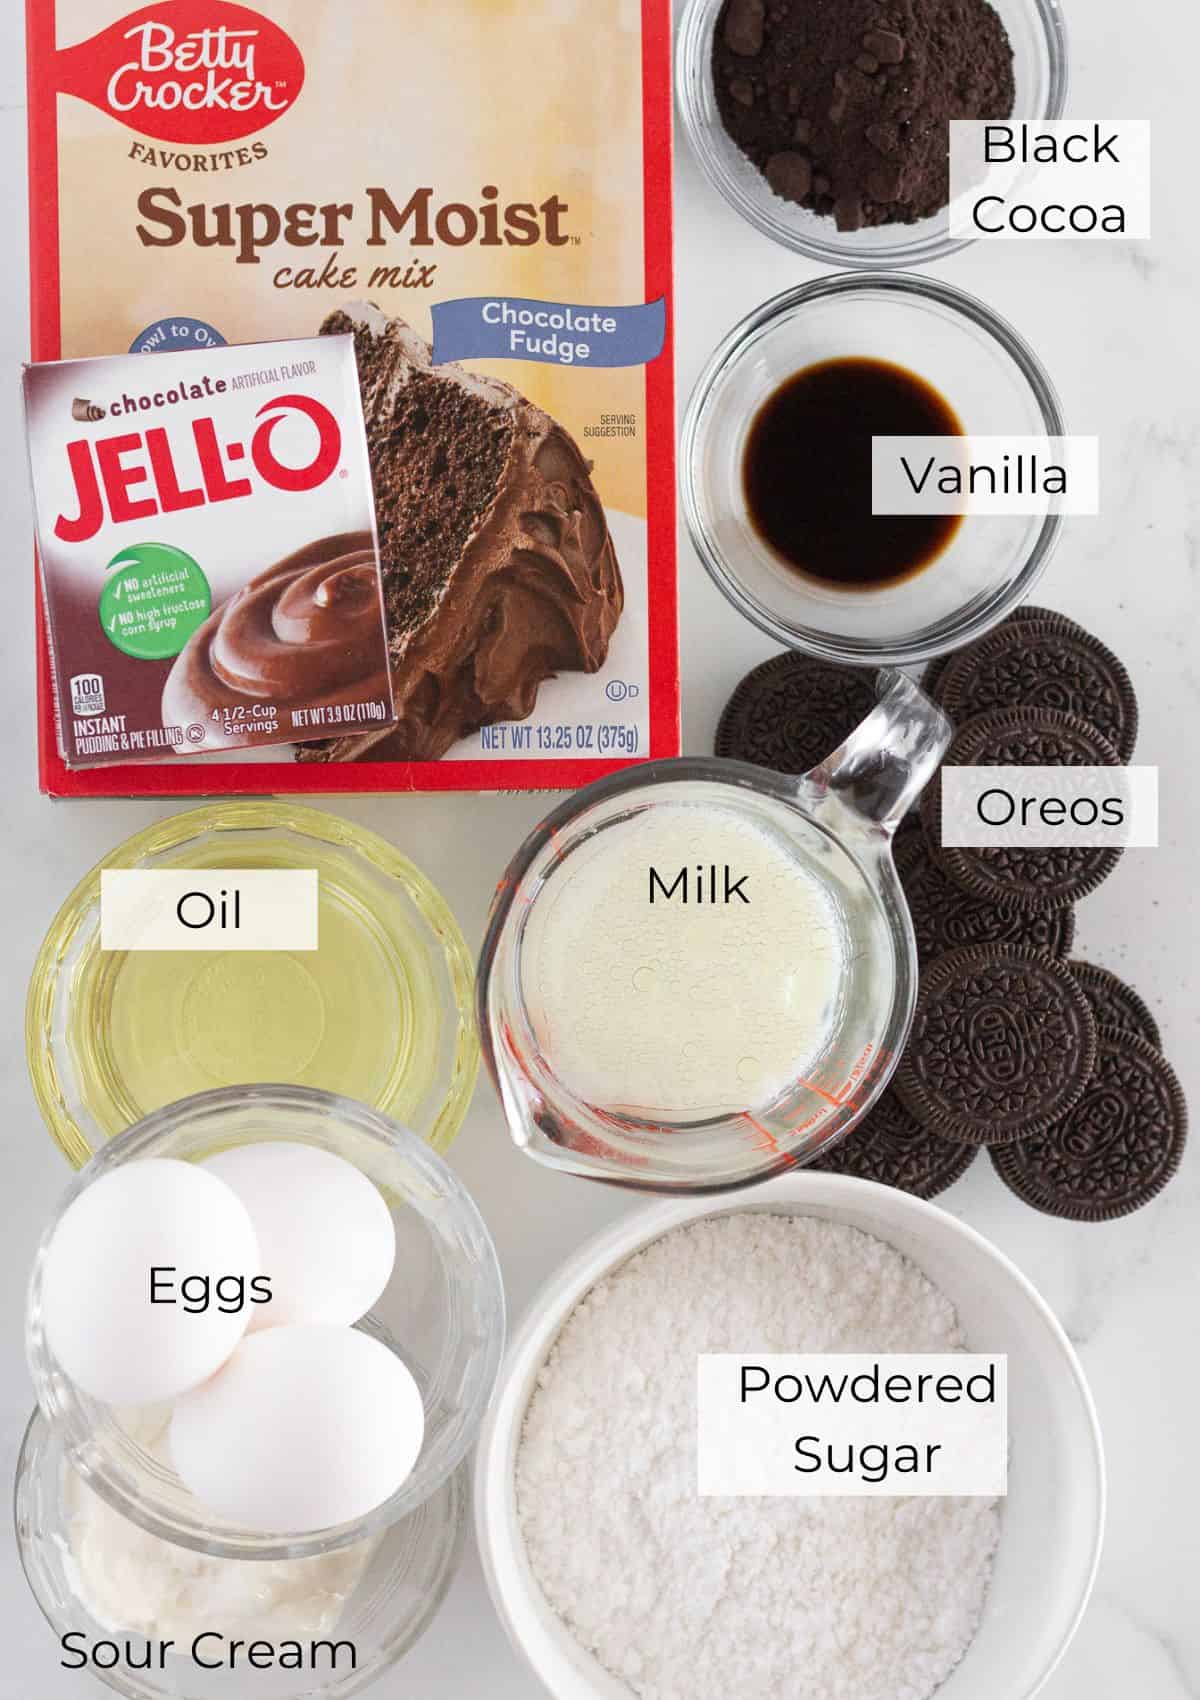 The ingredients needed to make an Oreo Bundt Cake.